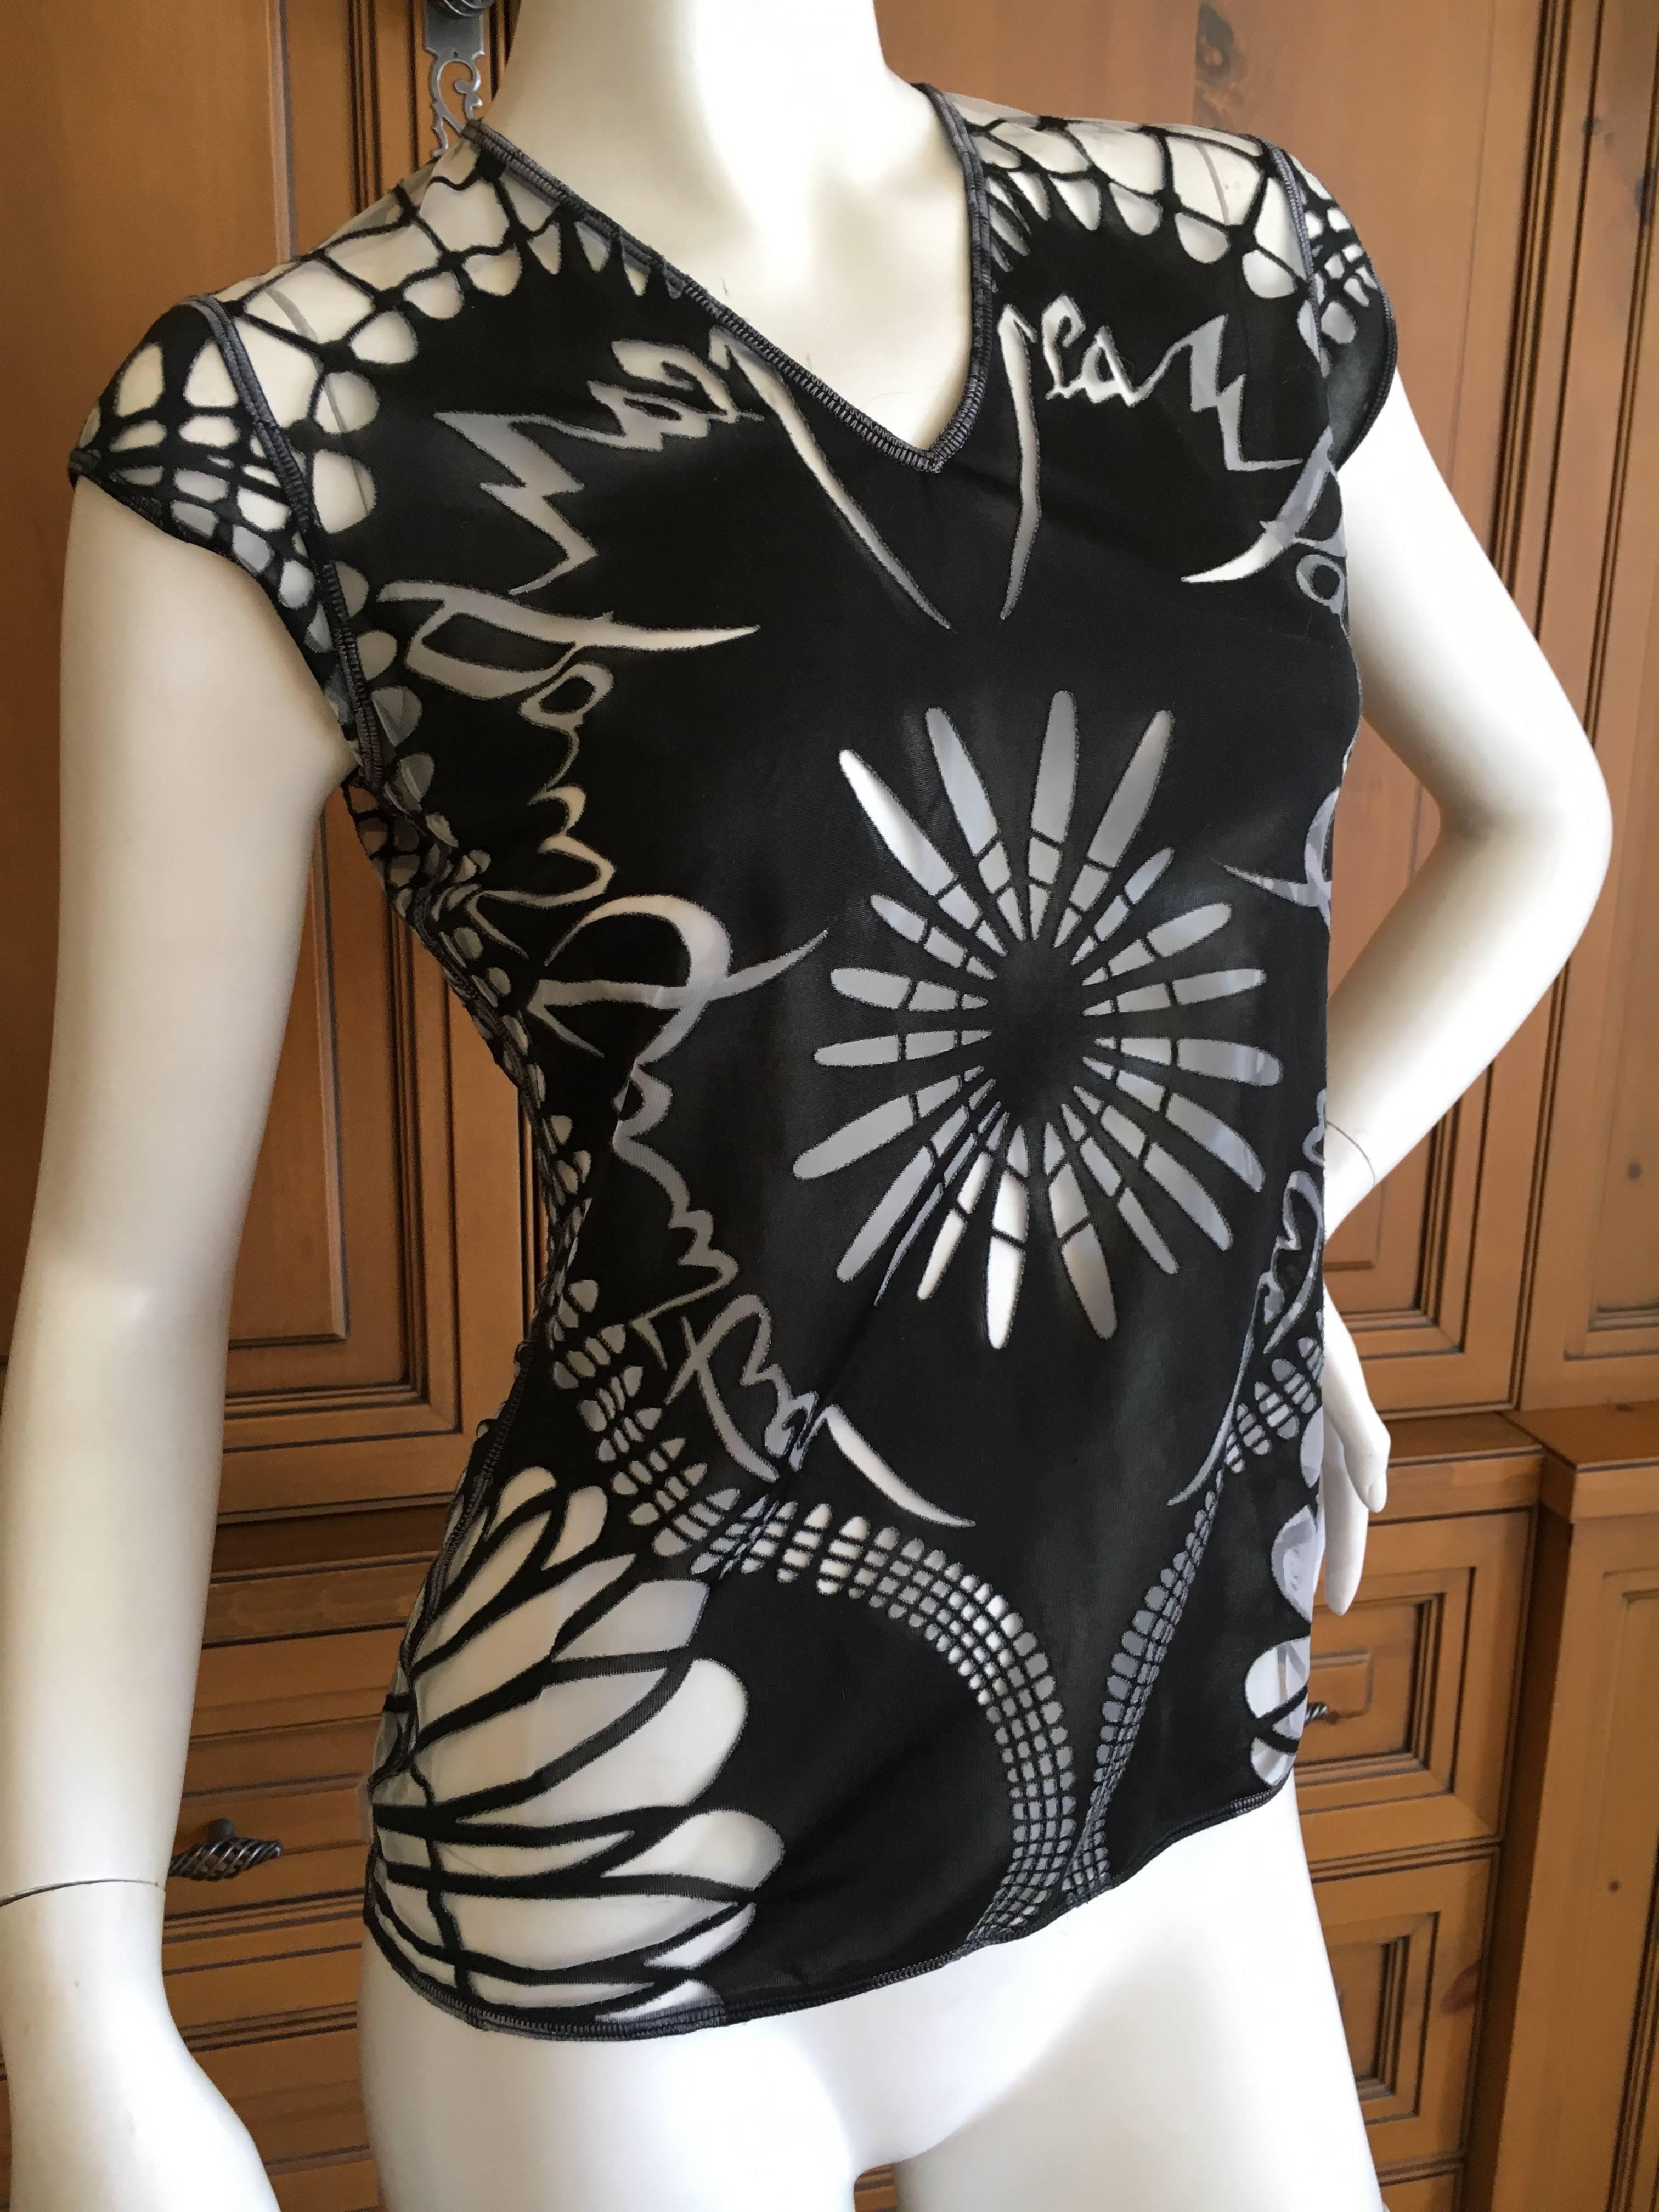 Jean Paul Gaultier Femme 1990's sheer tattoo print top.
From the Jean Paul Gaultier Maille Femme label.
Size 38
Bust 38"
Length 24"
Excellent condition